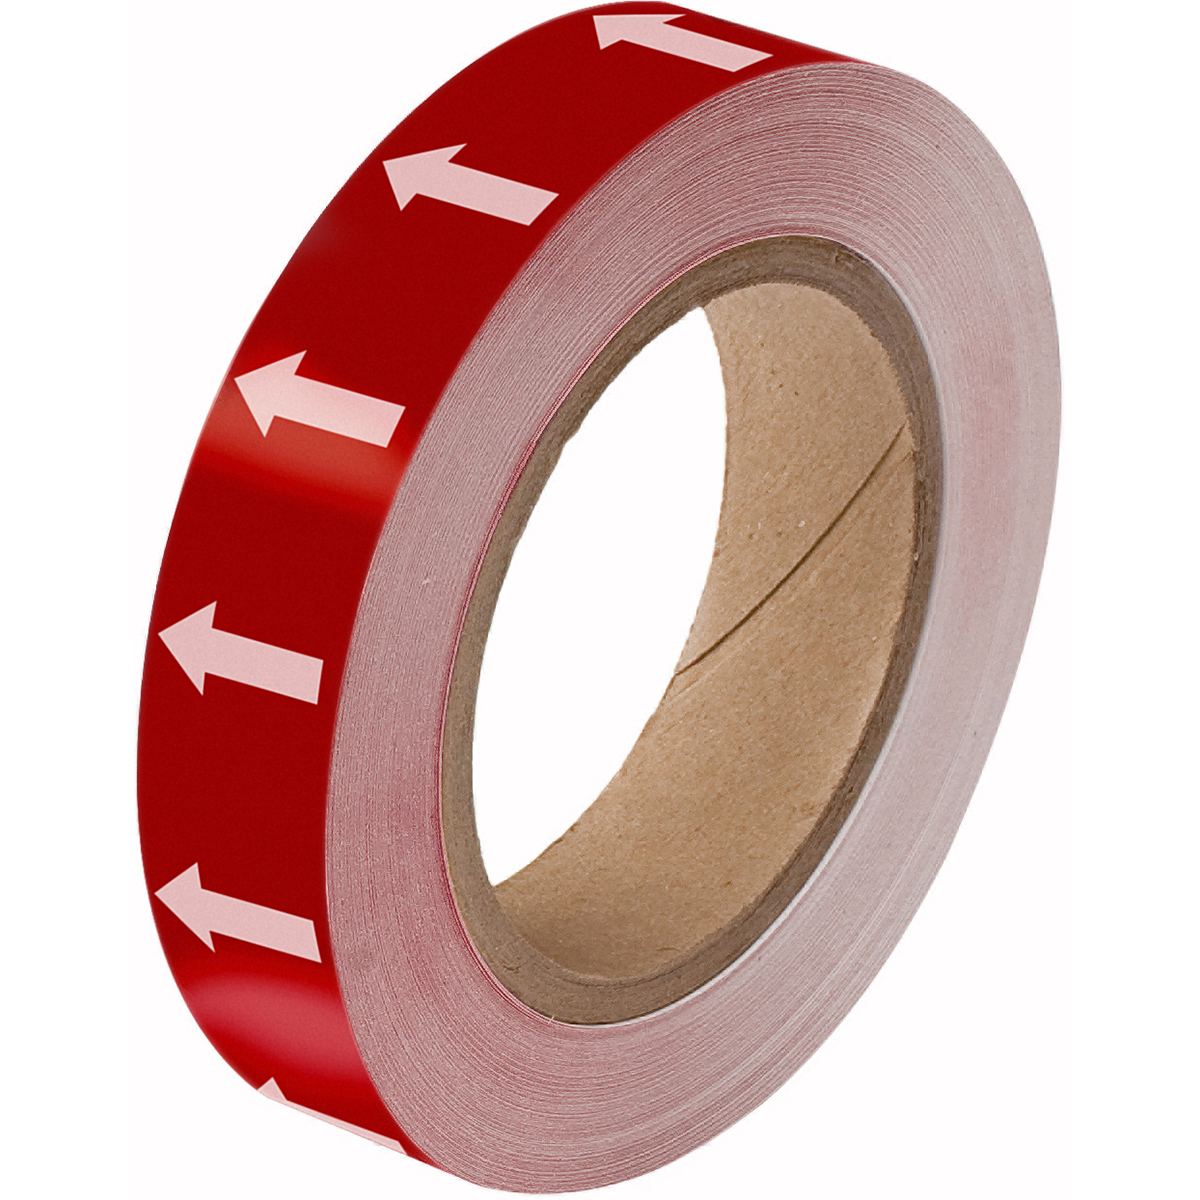 White on Red Directional Flow Arrow Tape